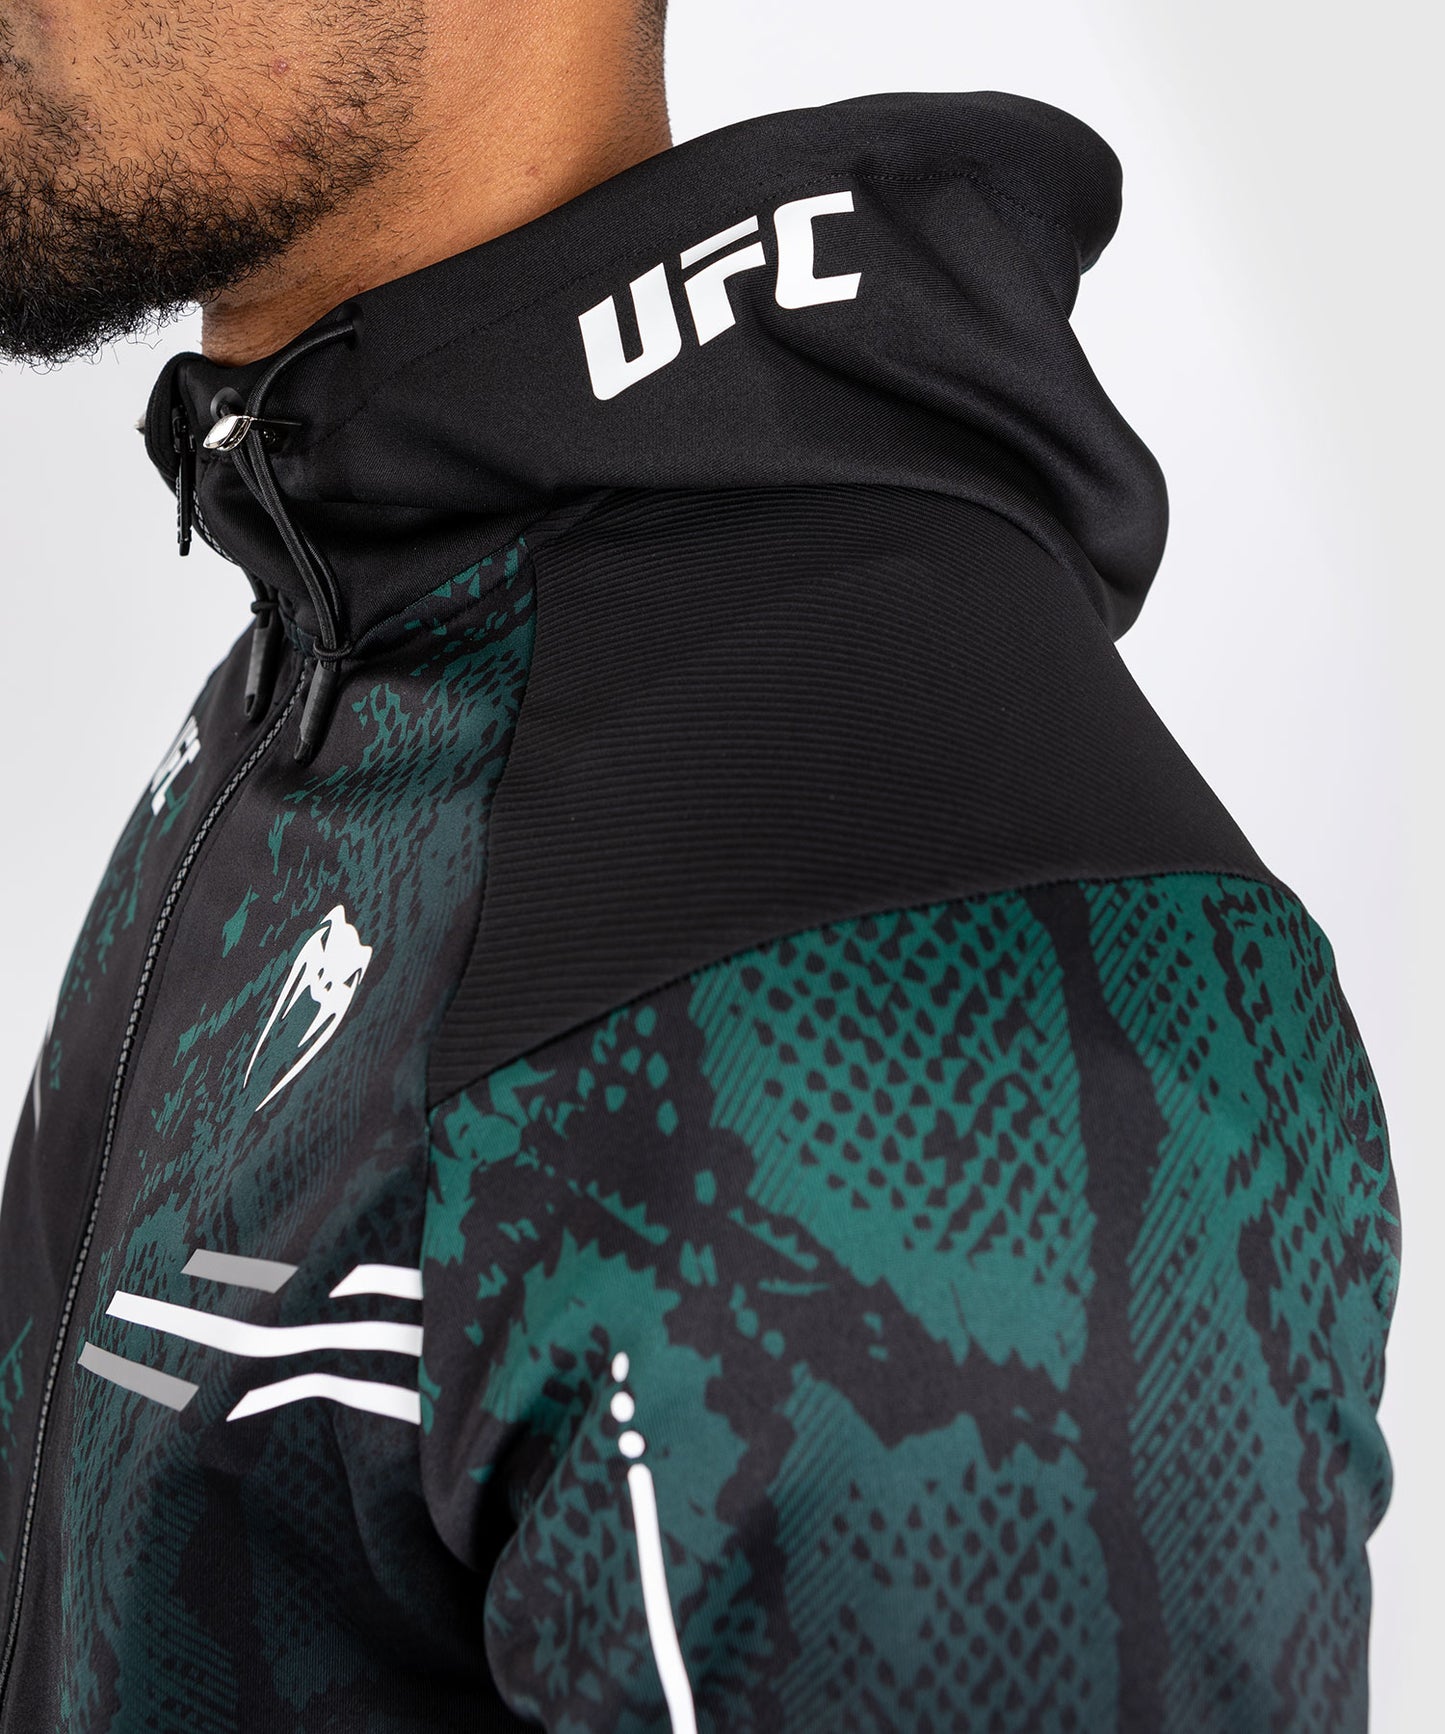 UFC Adrenaline by Venum Personalized Authentic Fight Night Men's Walkout Hoodie - Emerald Edition - Green/Black